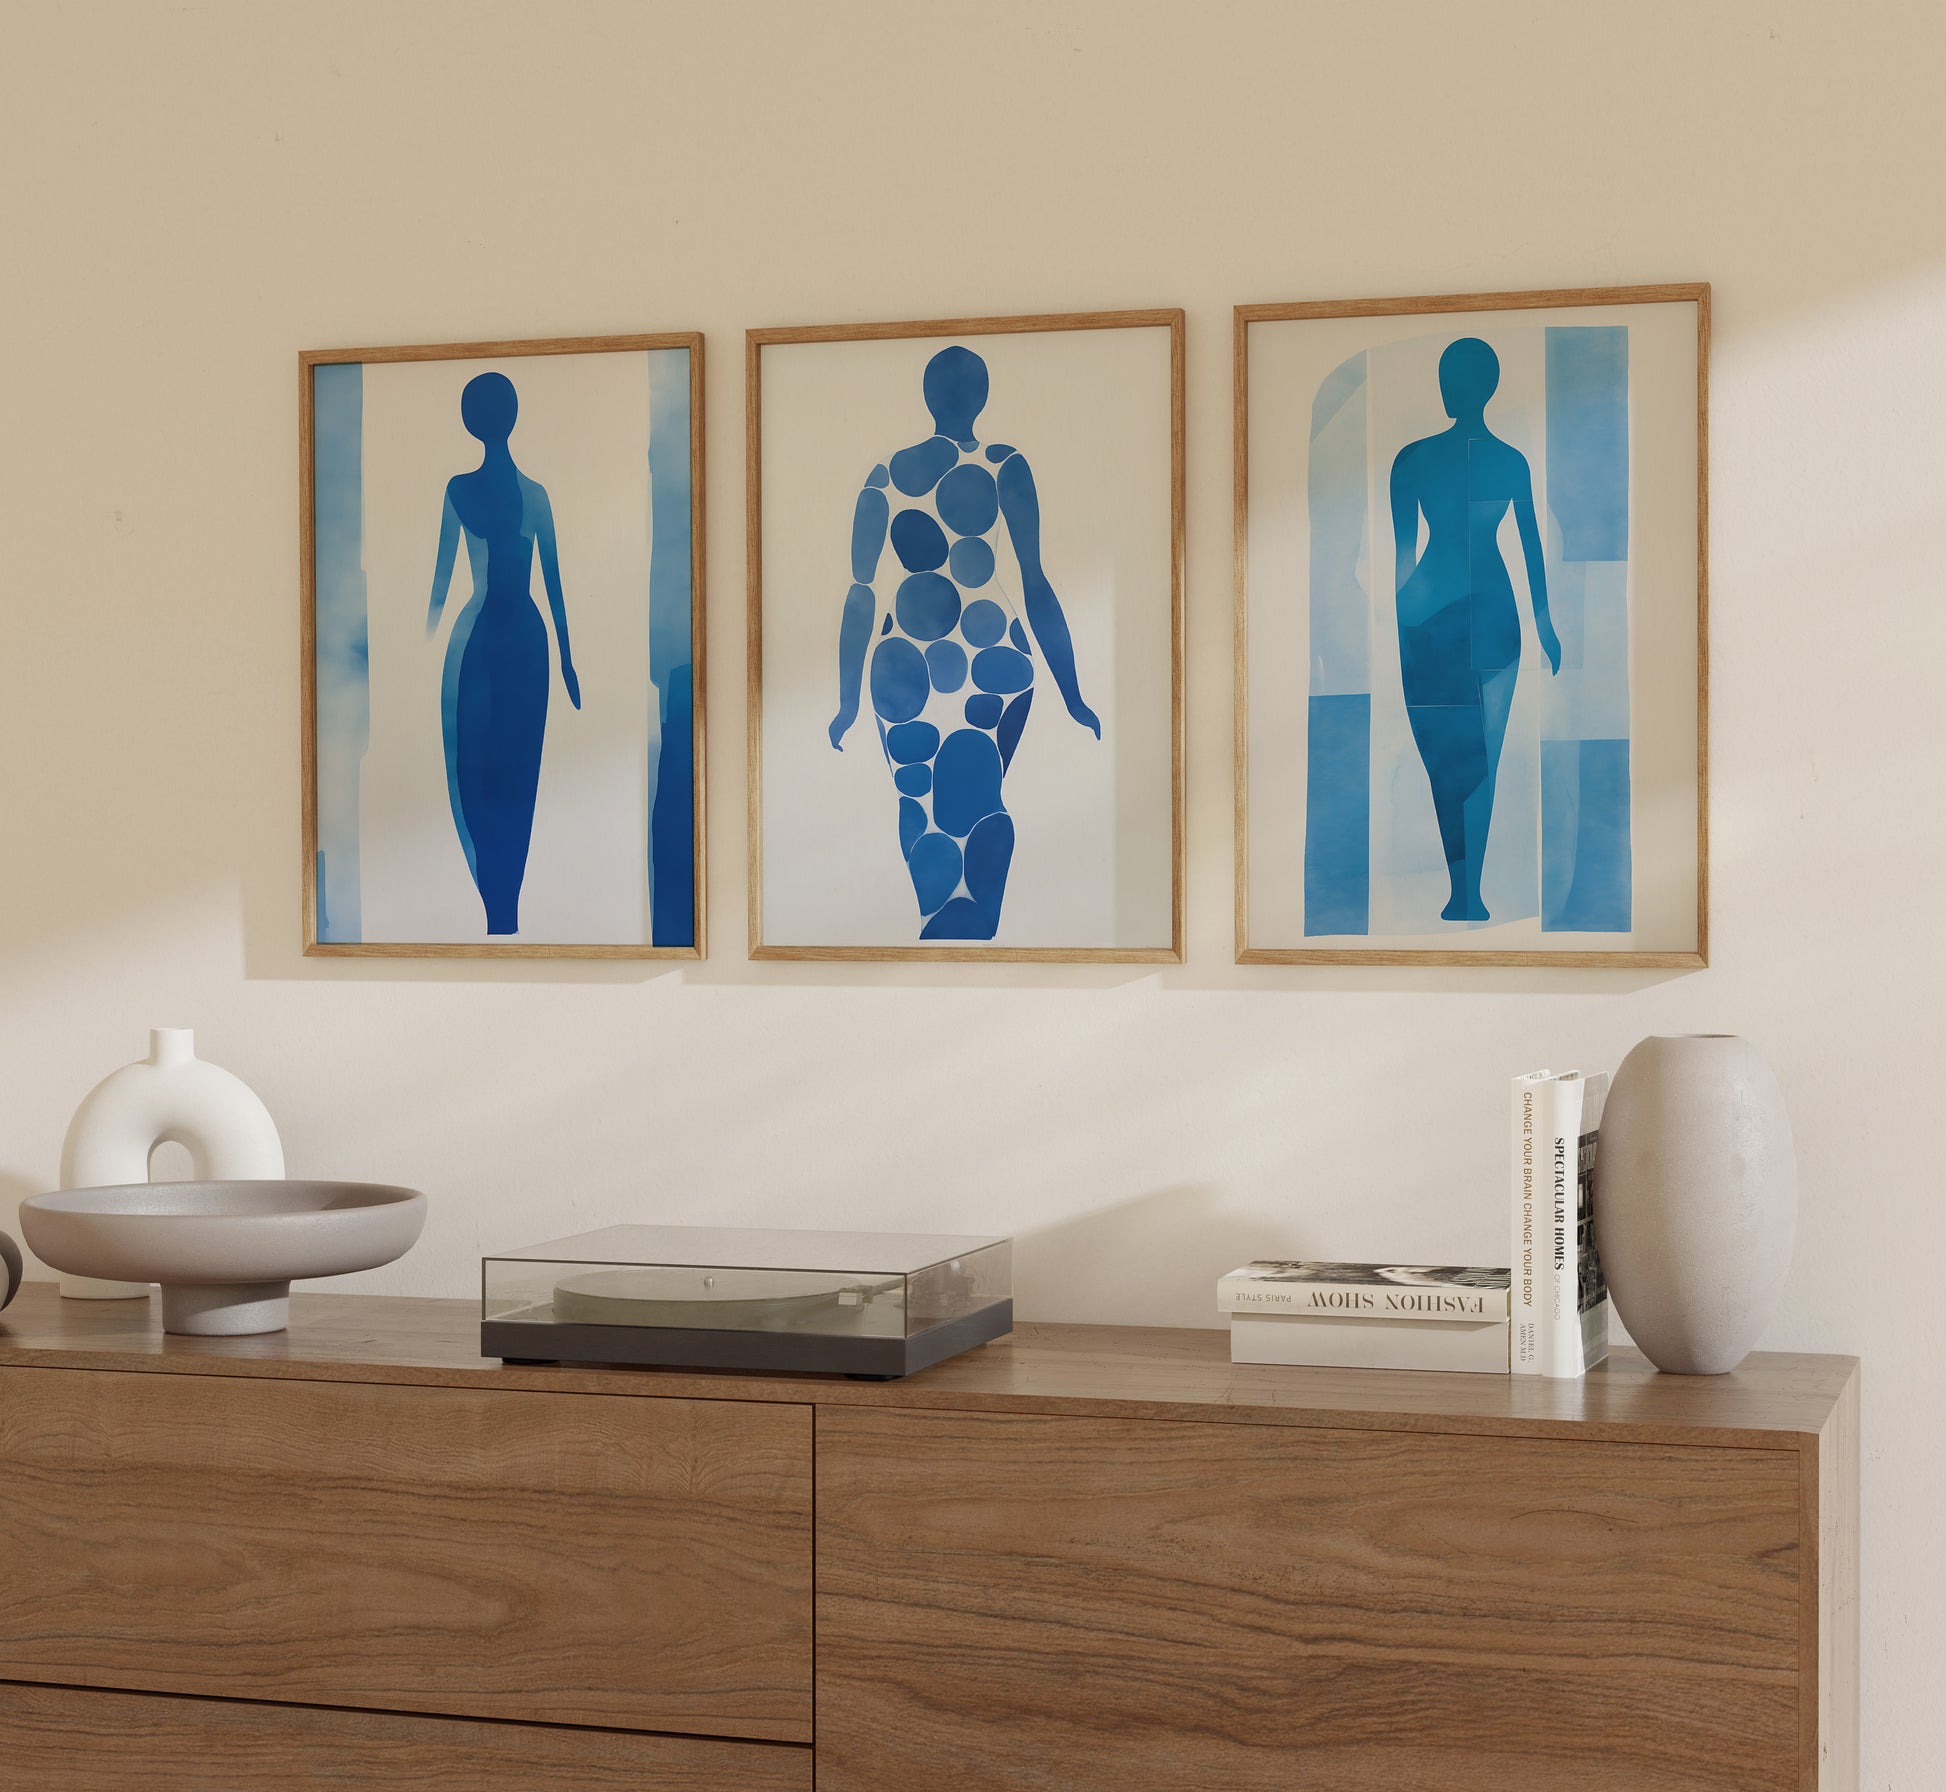 Three abstract framed art pieces depicting blue silhouetted figures on a wall above a wooden sideboard.